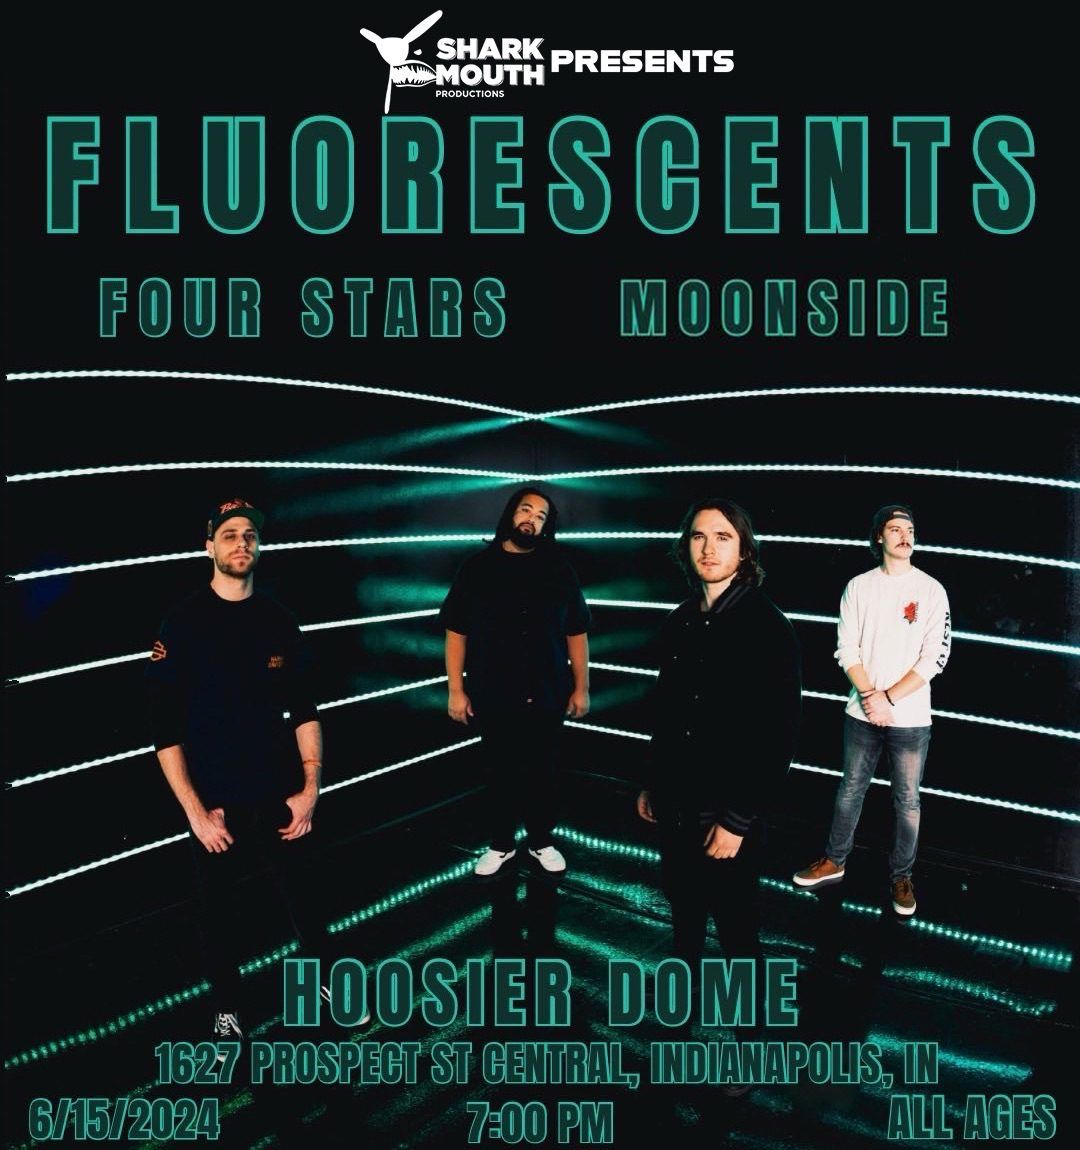 FLUORESCENTS, FOUR STARS, MOONSIDE AT THE HOOSIER DOME